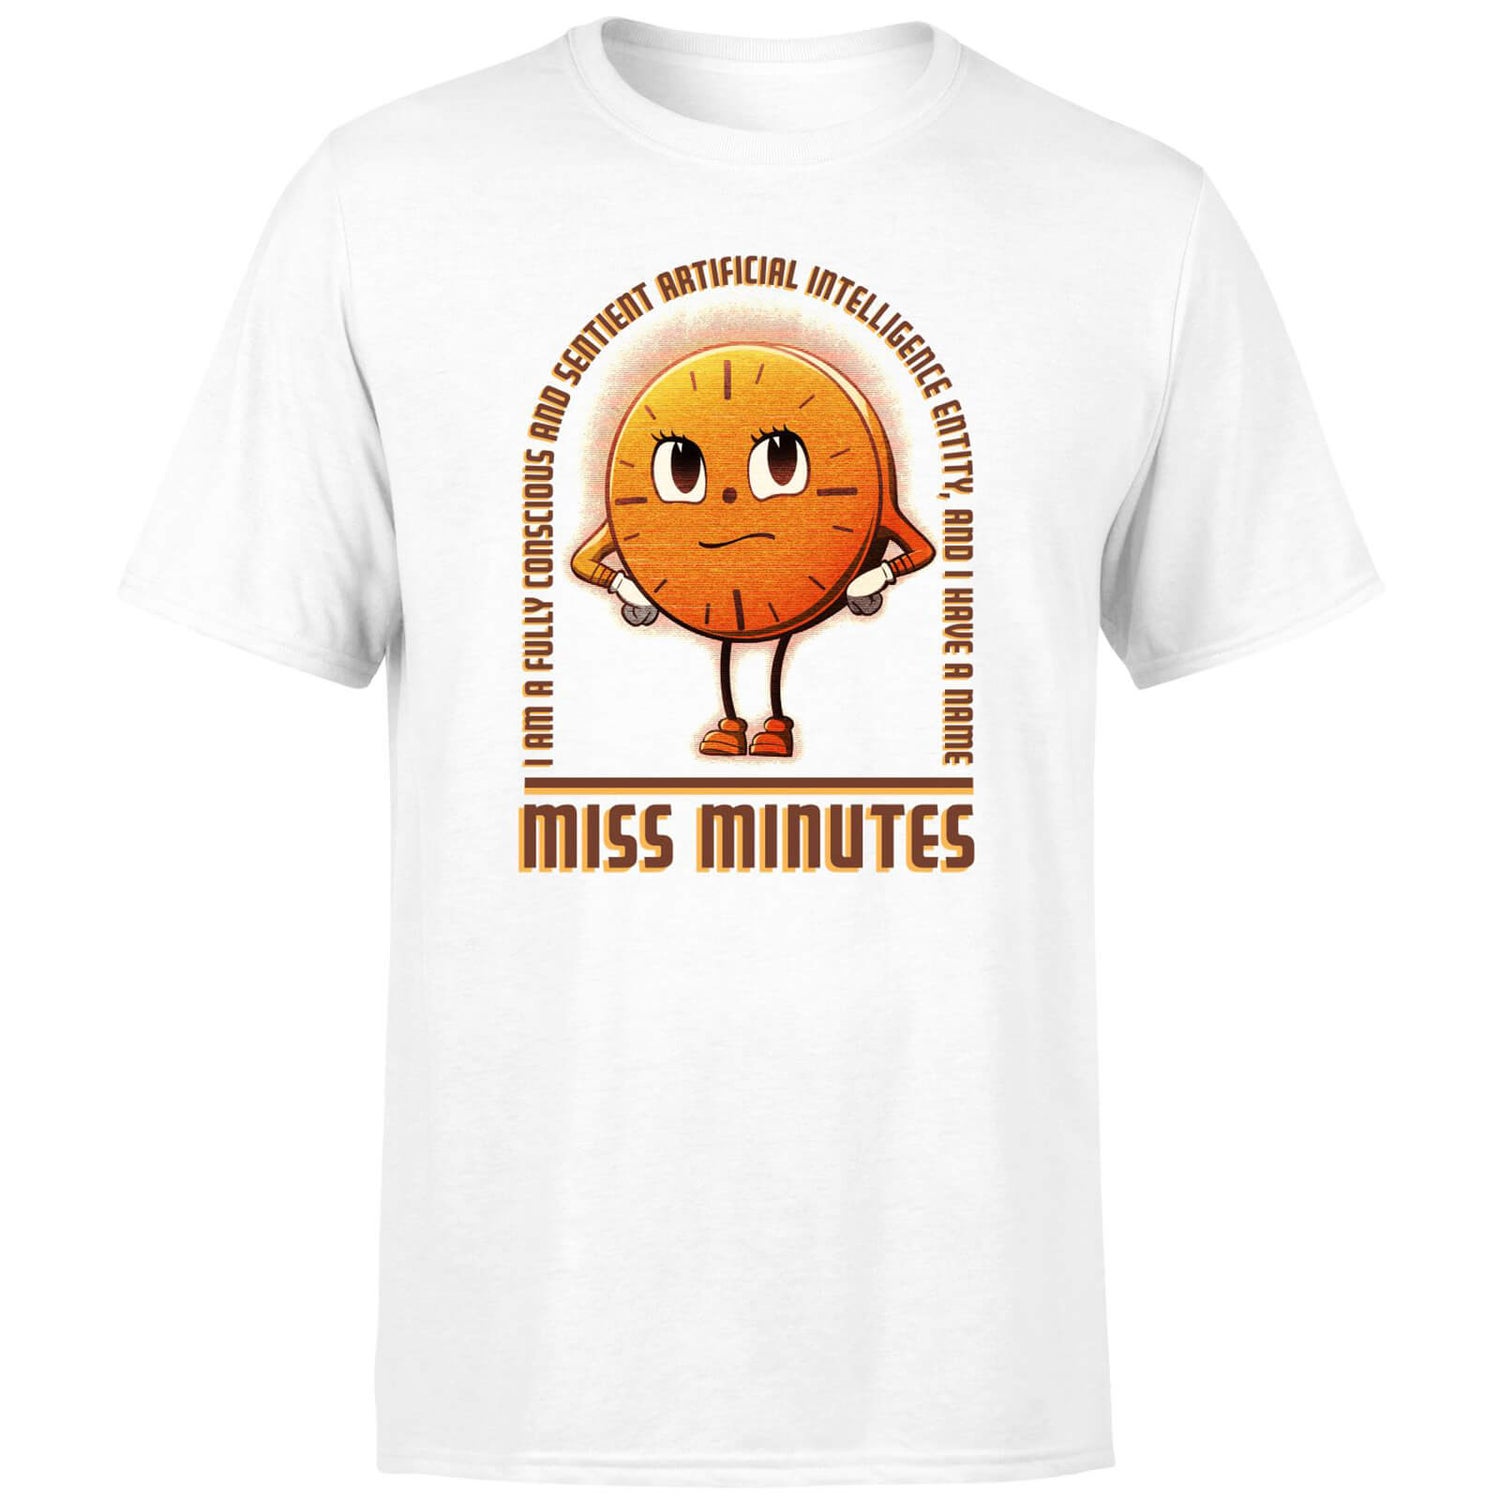 My Name Is Miss Minutes Men's T-Shirt - White